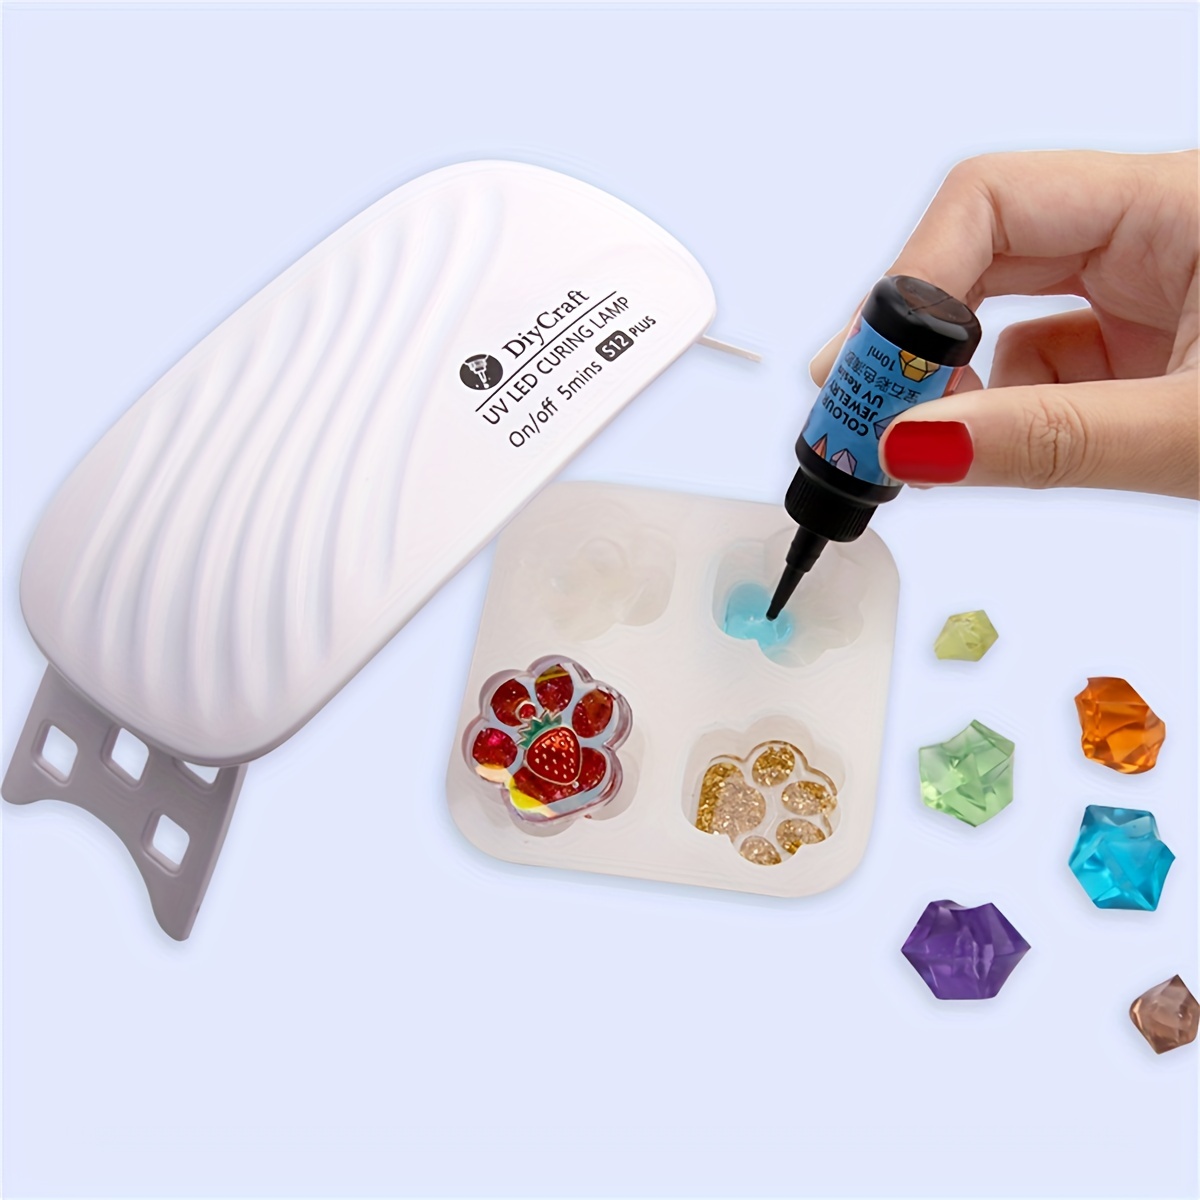  LED UV Lamp 54W Resin Curing Light, Jewelry Casting